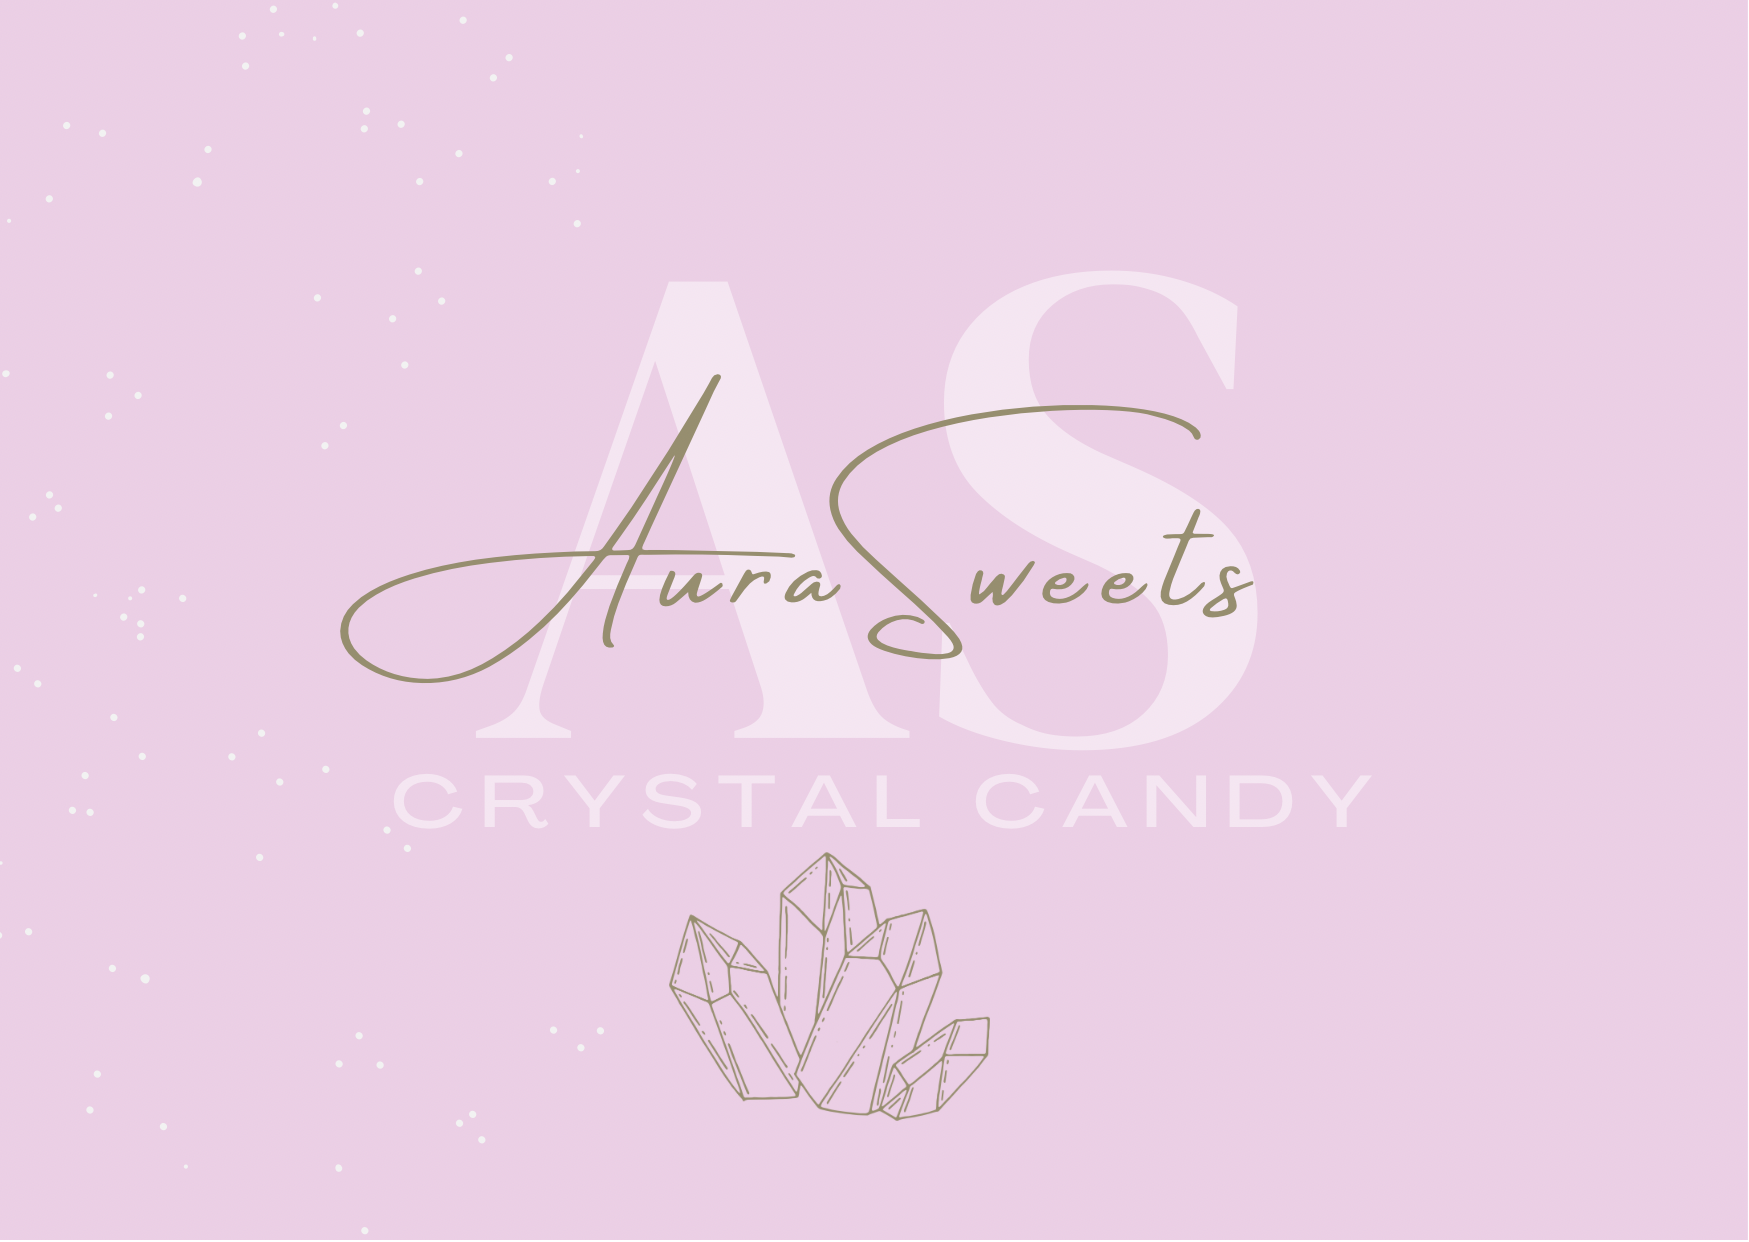 Aura sweets crystal candy | AuraSweets